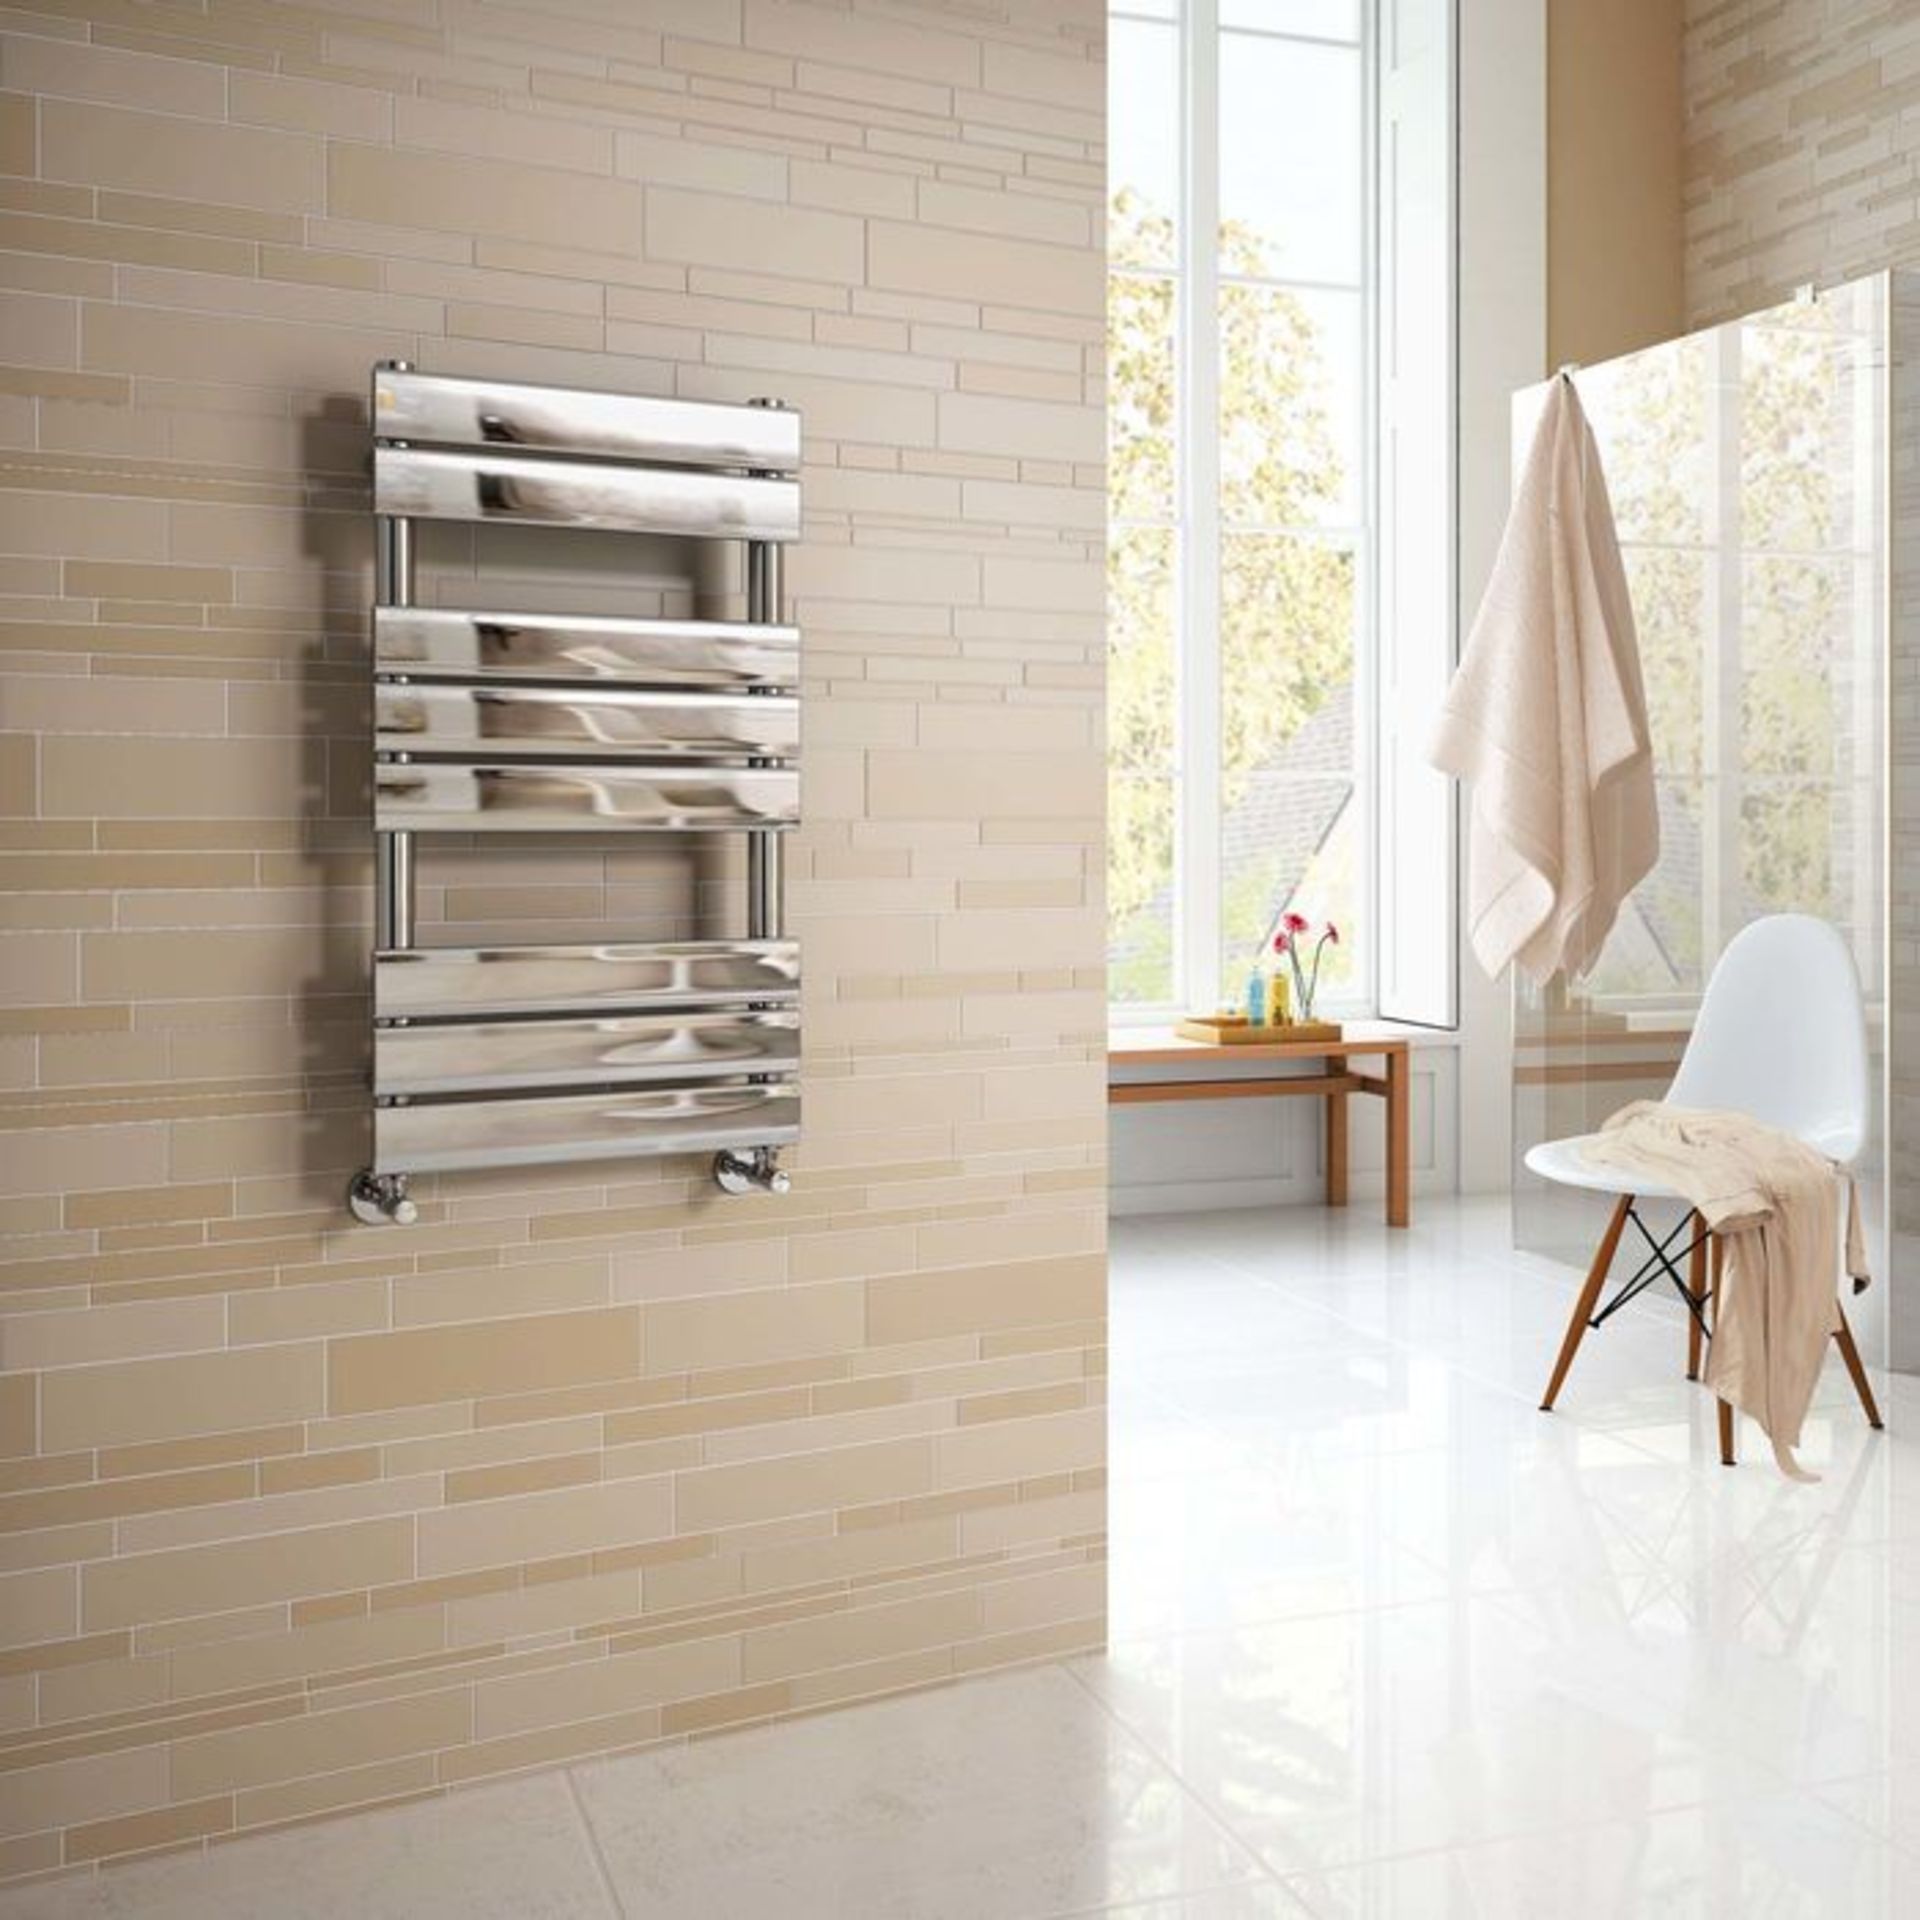 (PT52) 800x450mm Chrome Flat Panel Ladder Towel Radiator. RRP £244.99. Made from low carbon steel